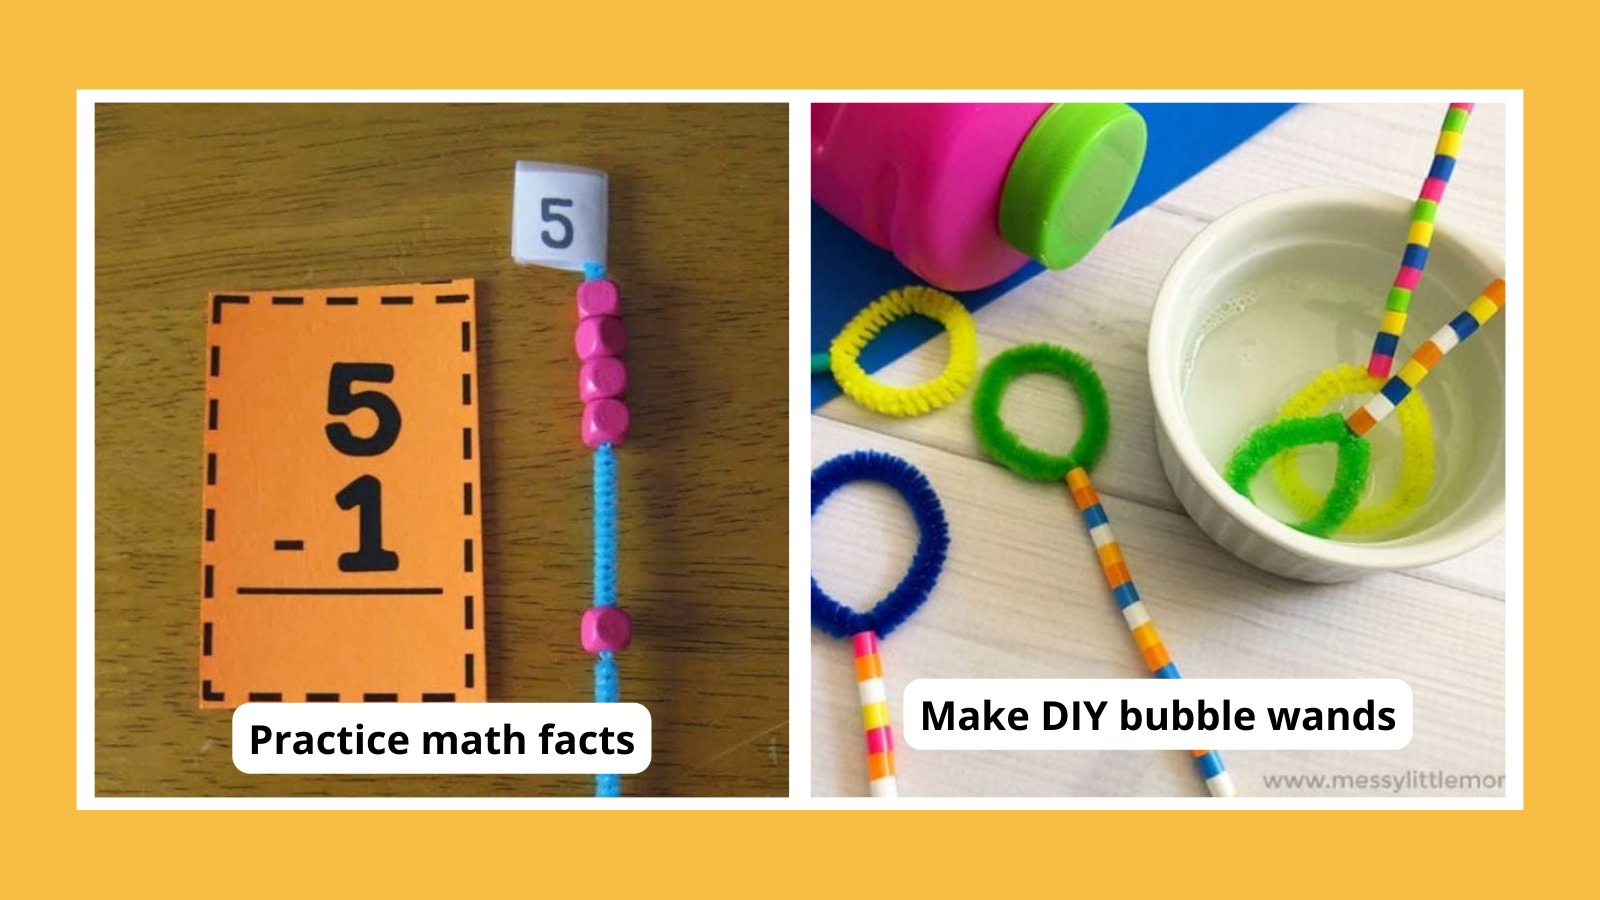 Pipe cleaner crafts and learning activities, including practicing math facts and DIY bubble wands.